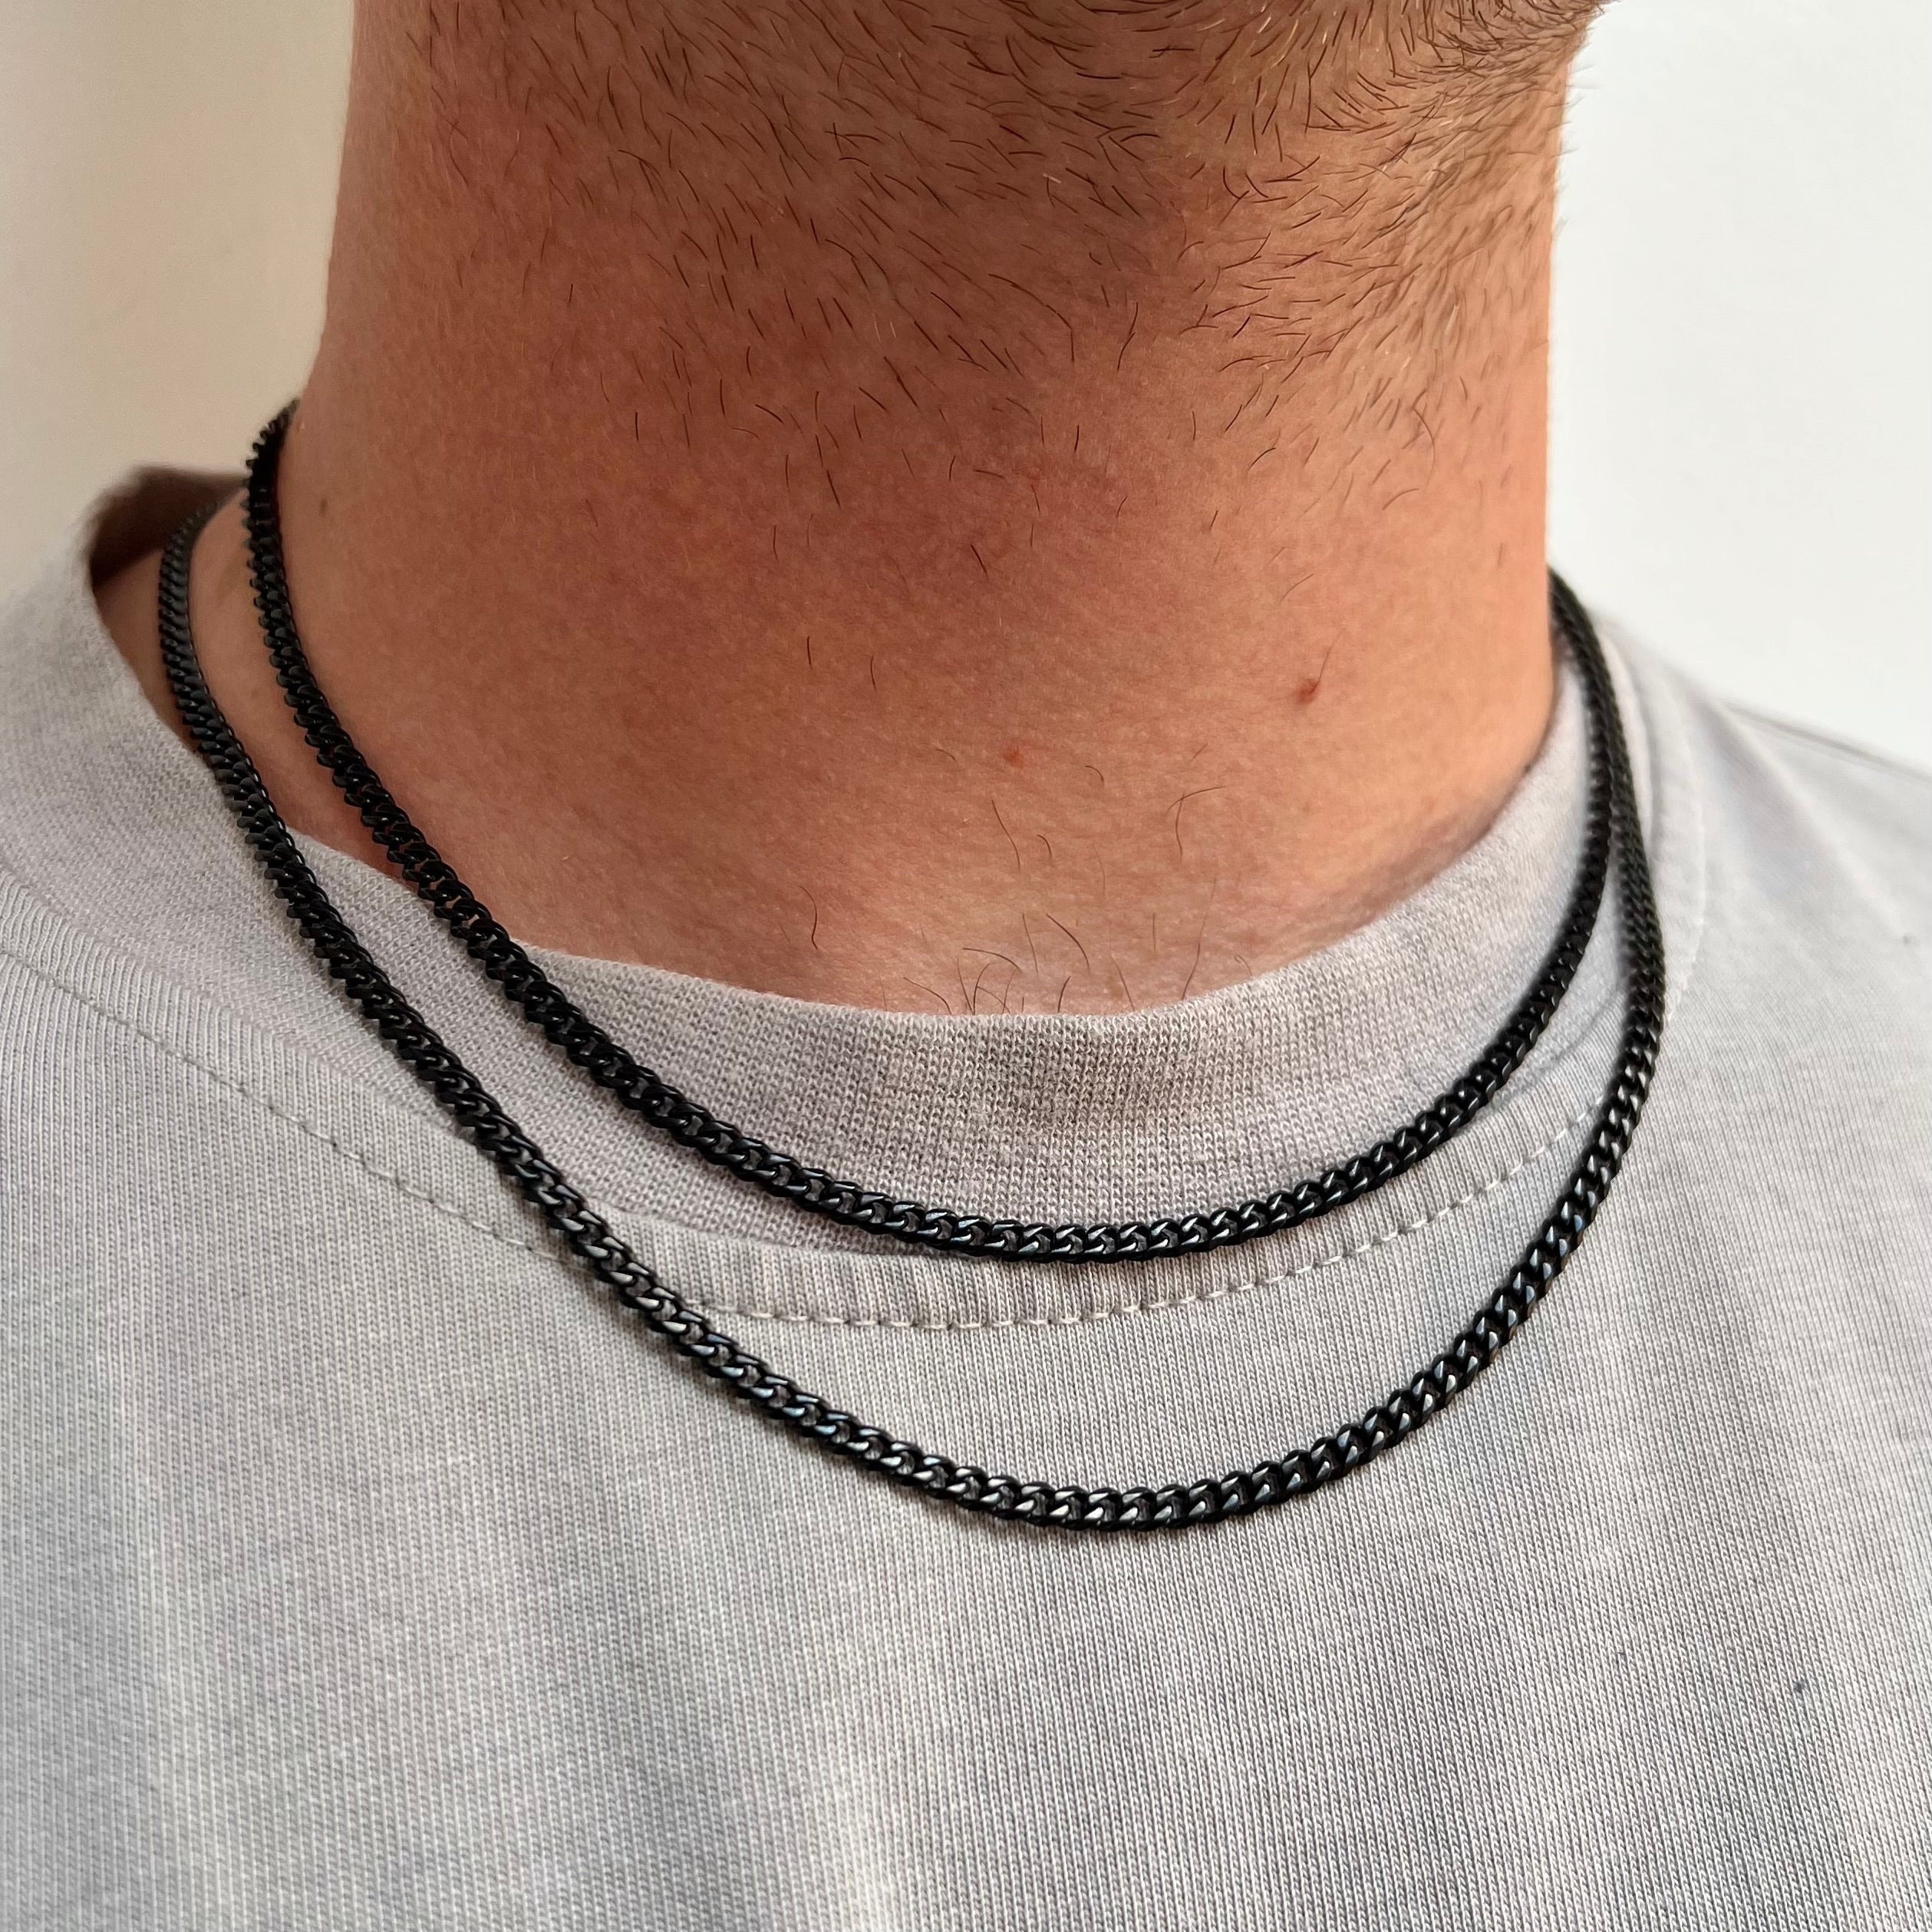 20-inch 3mm Rubber Necklace - Black with Sterling Silver Clasp